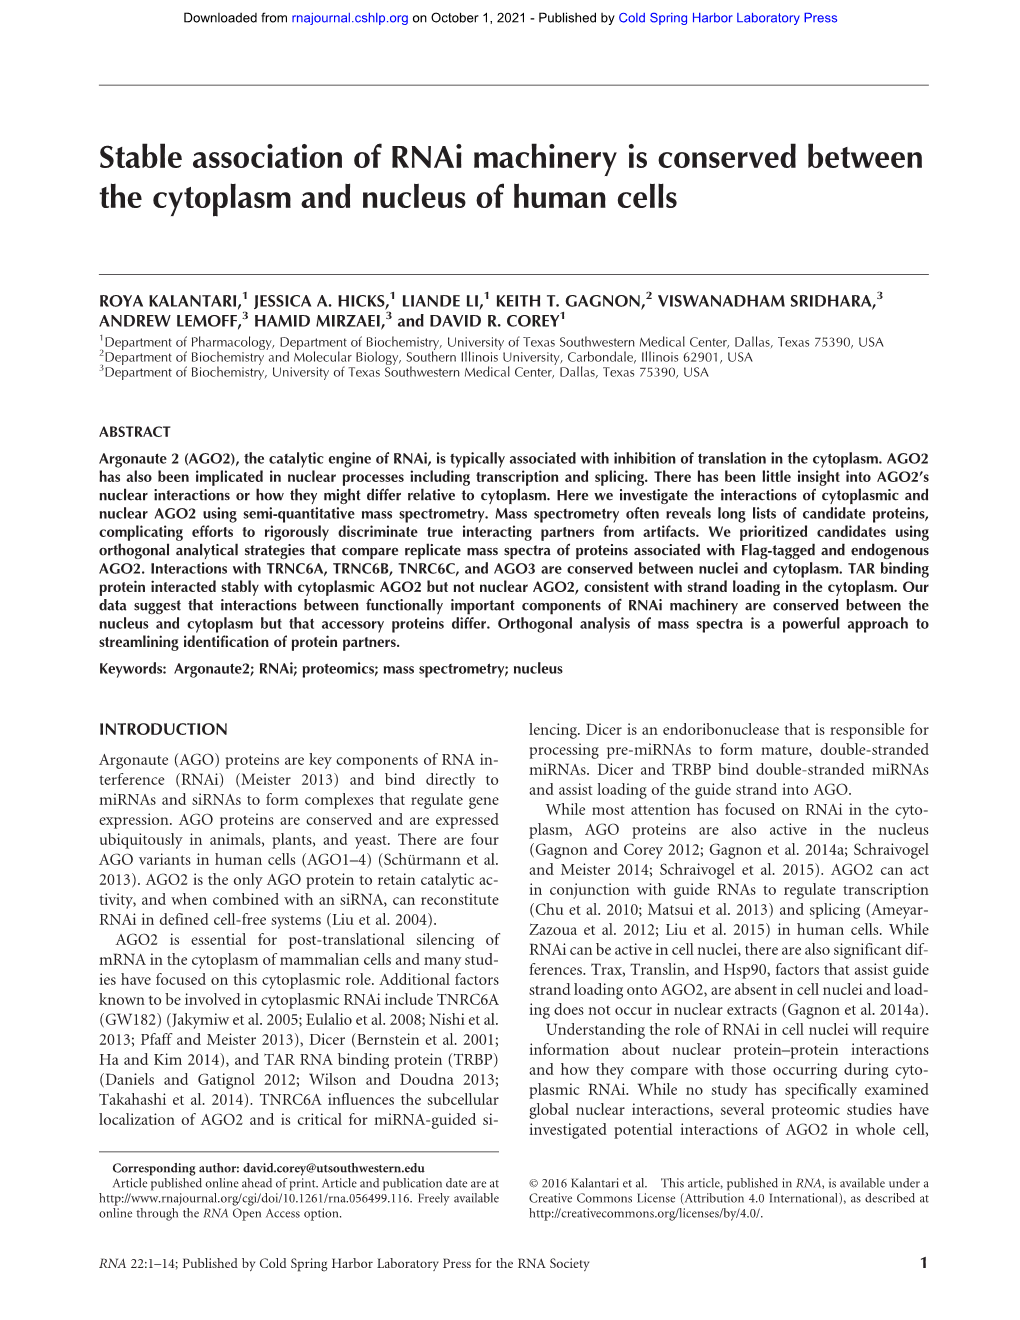 Stable Association of Rnai Machinery Is Conserved Between the Cytoplasm and Nucleus of Human Cells